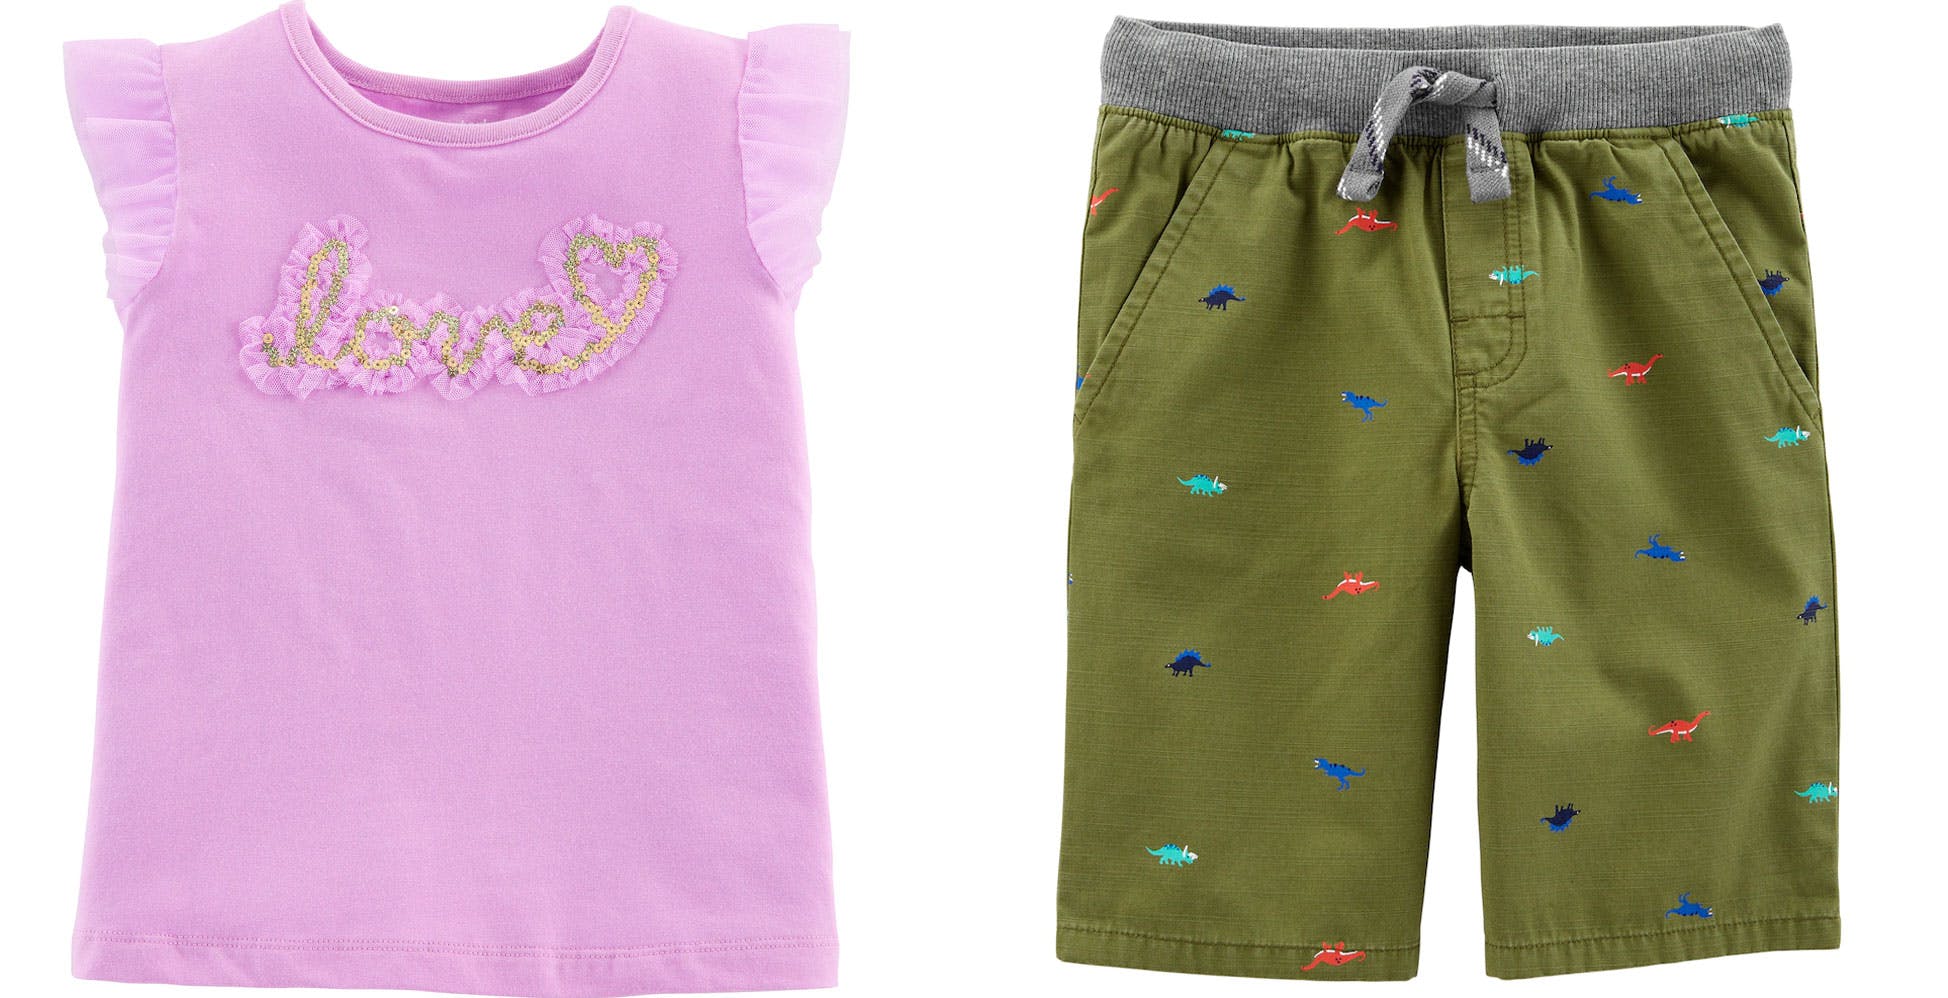 Clearance Carter's Baby Clothes Under 4 at Kohl's! The Krazy Coupon Lady